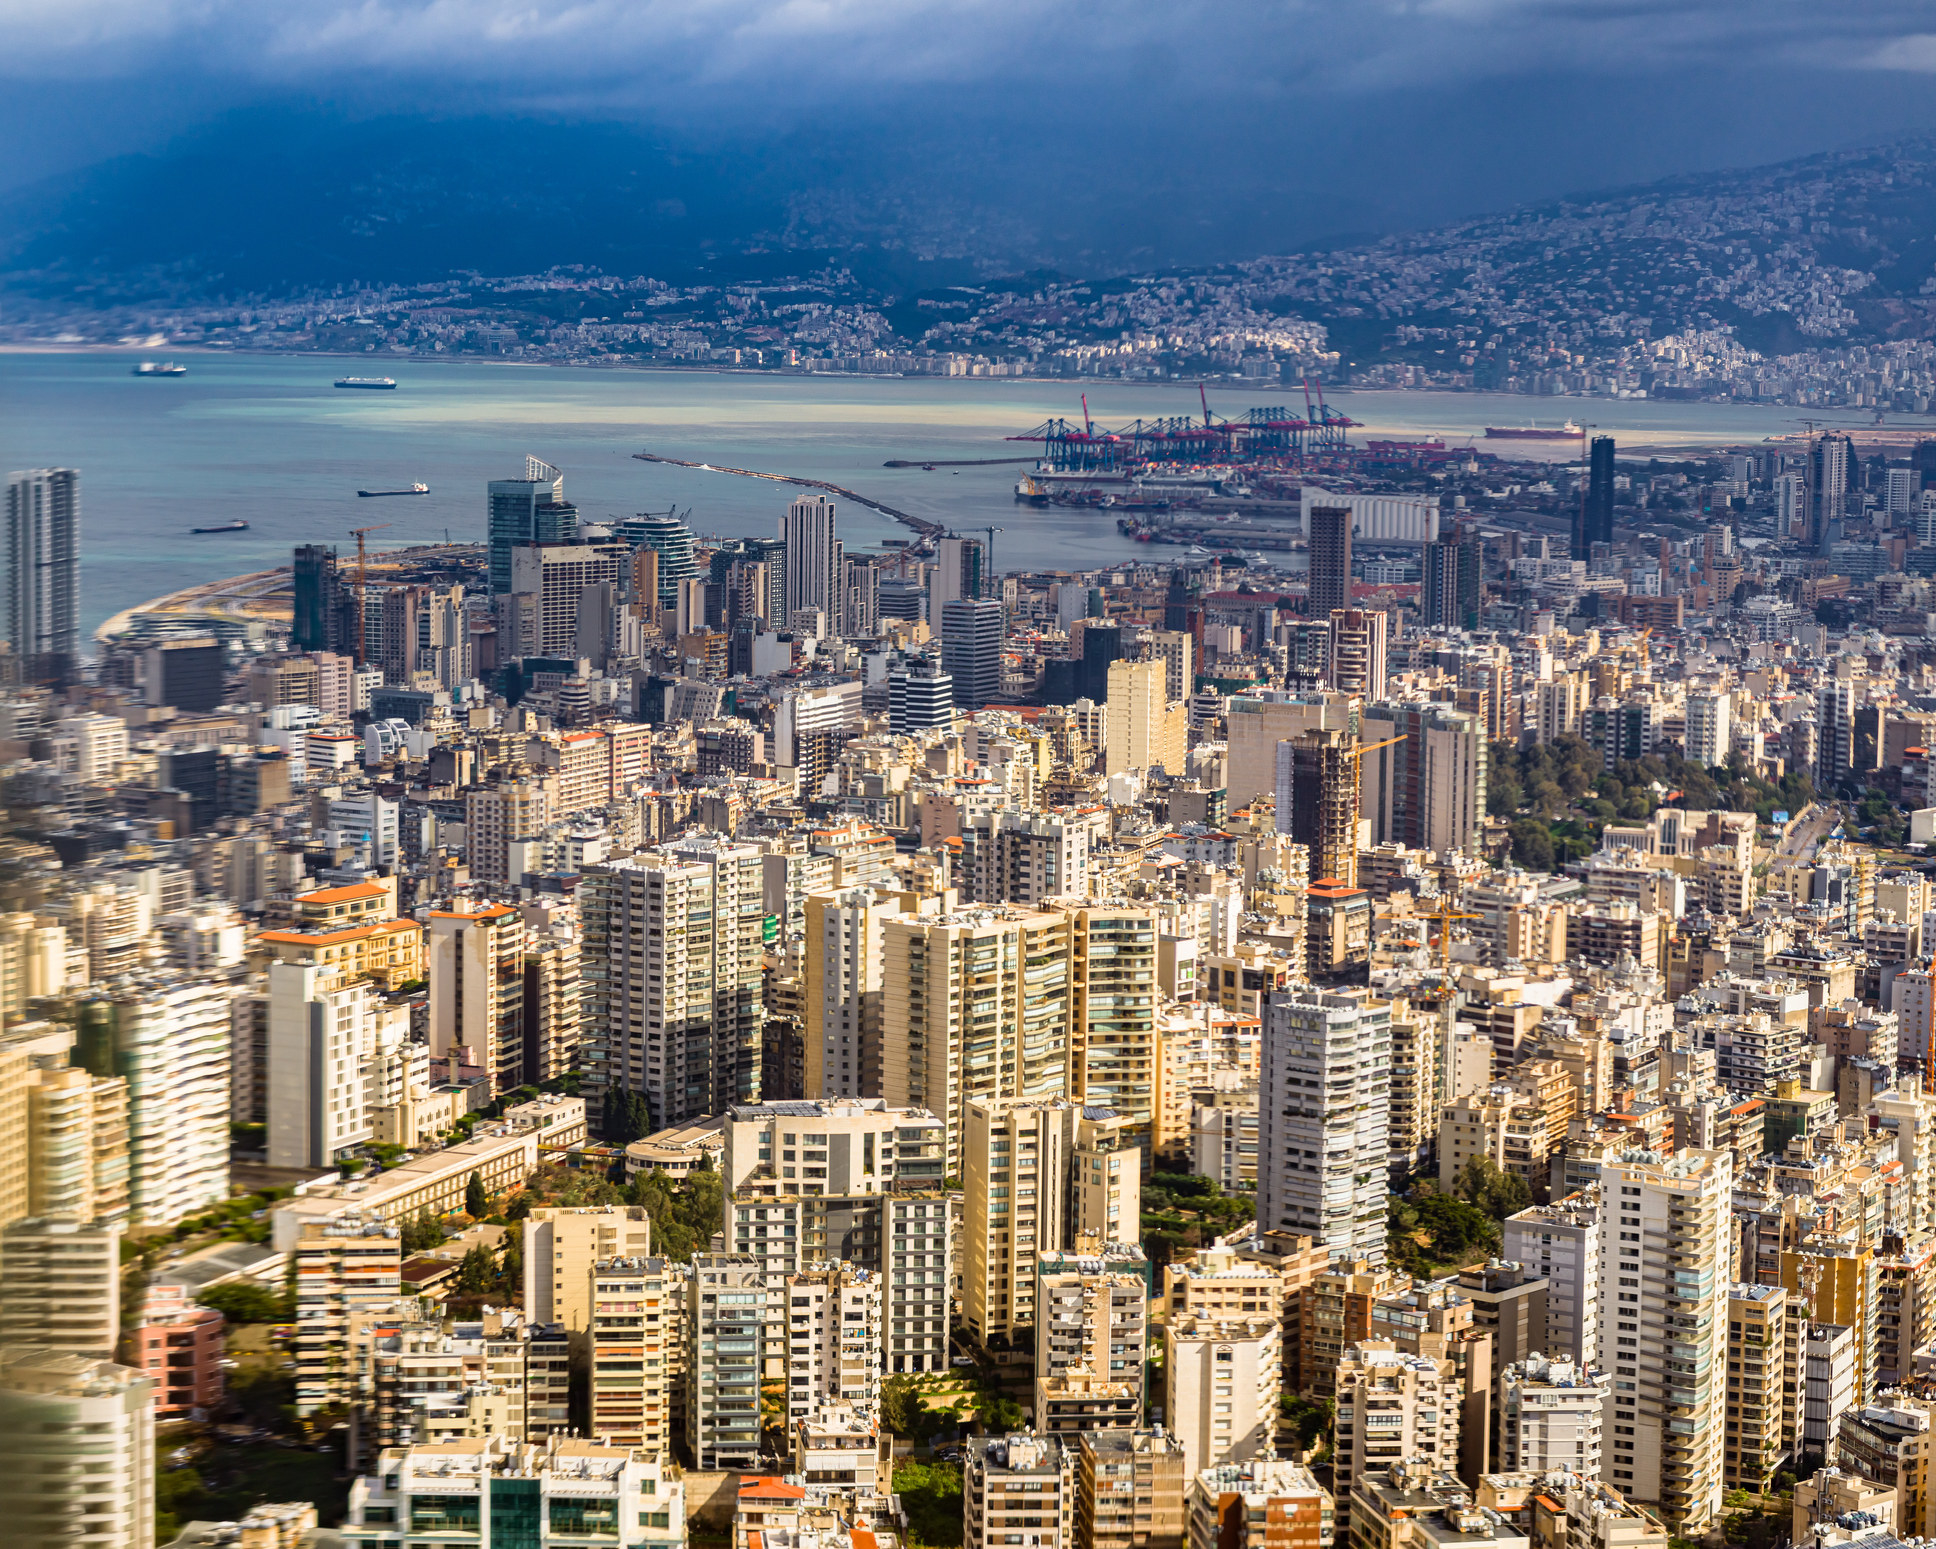 A cityscape of Beirut.